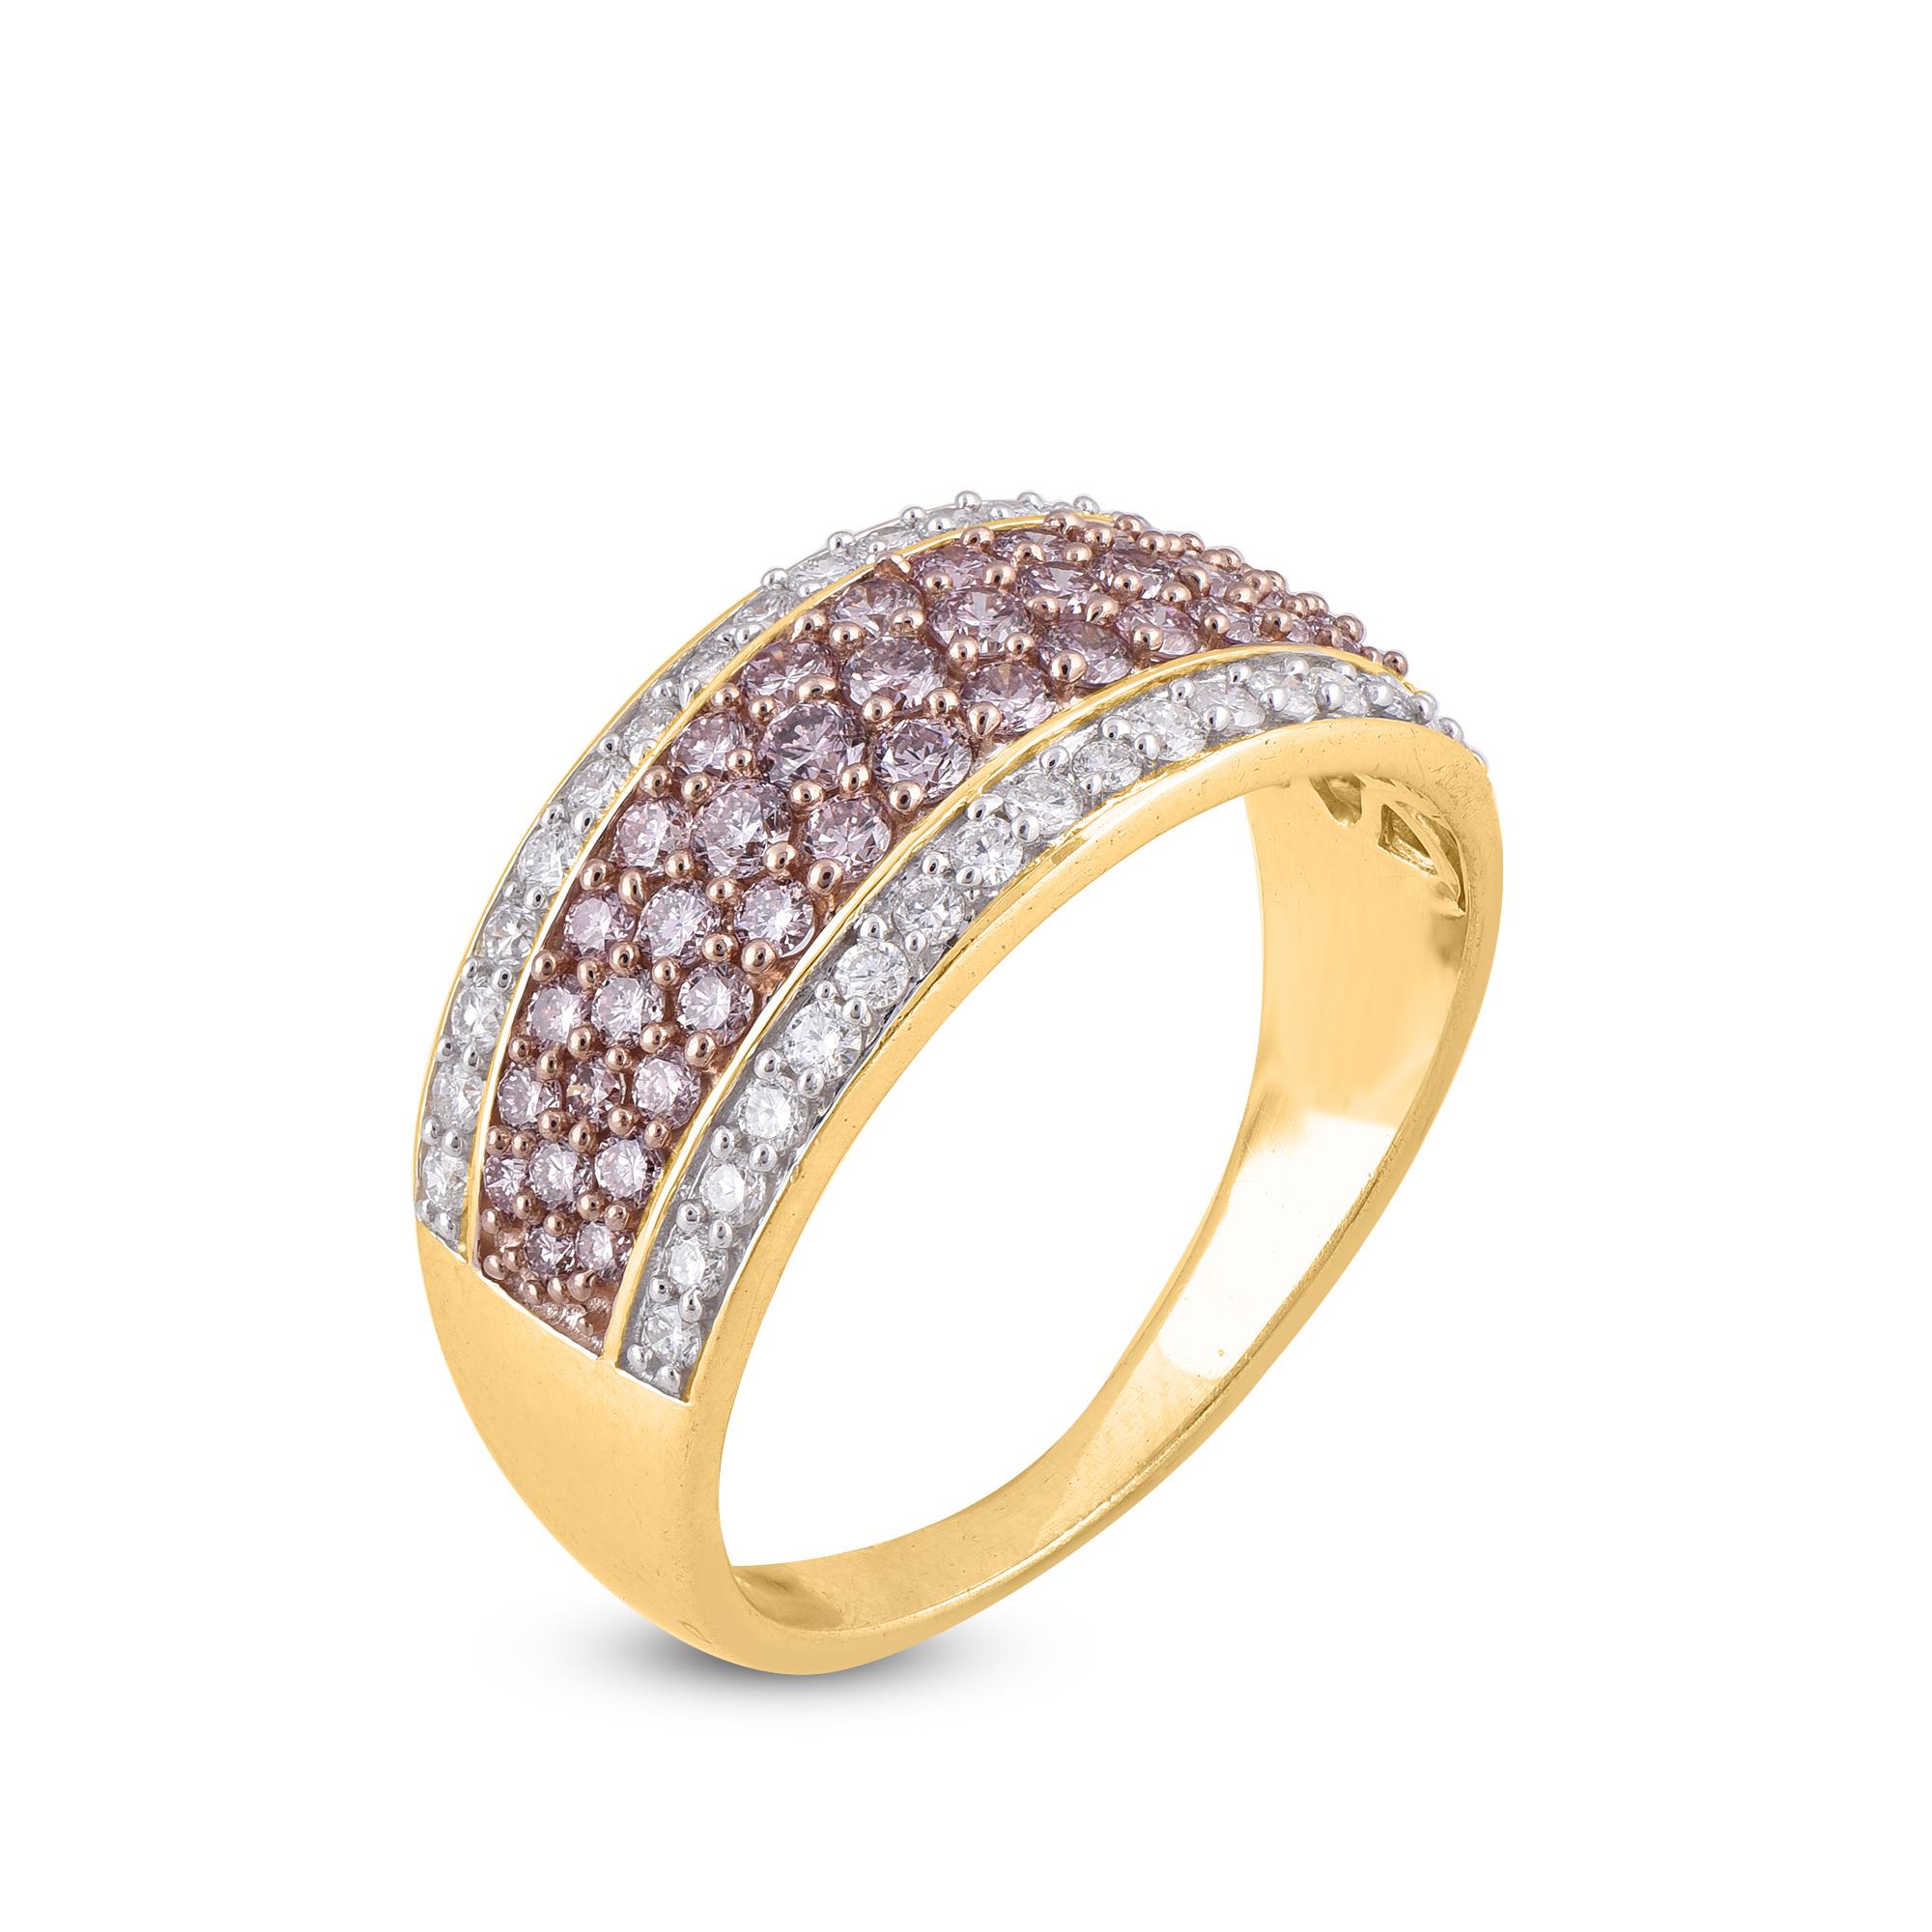 Exquisite 18K yellow gold wedding band jeweled with 34 round and 43 pink diamonds. This ring is superbly detailed to perfection and set with 1.00 carat of sparkling brilliant cut round diamonds in secured prong setting. The diamonds are natural,